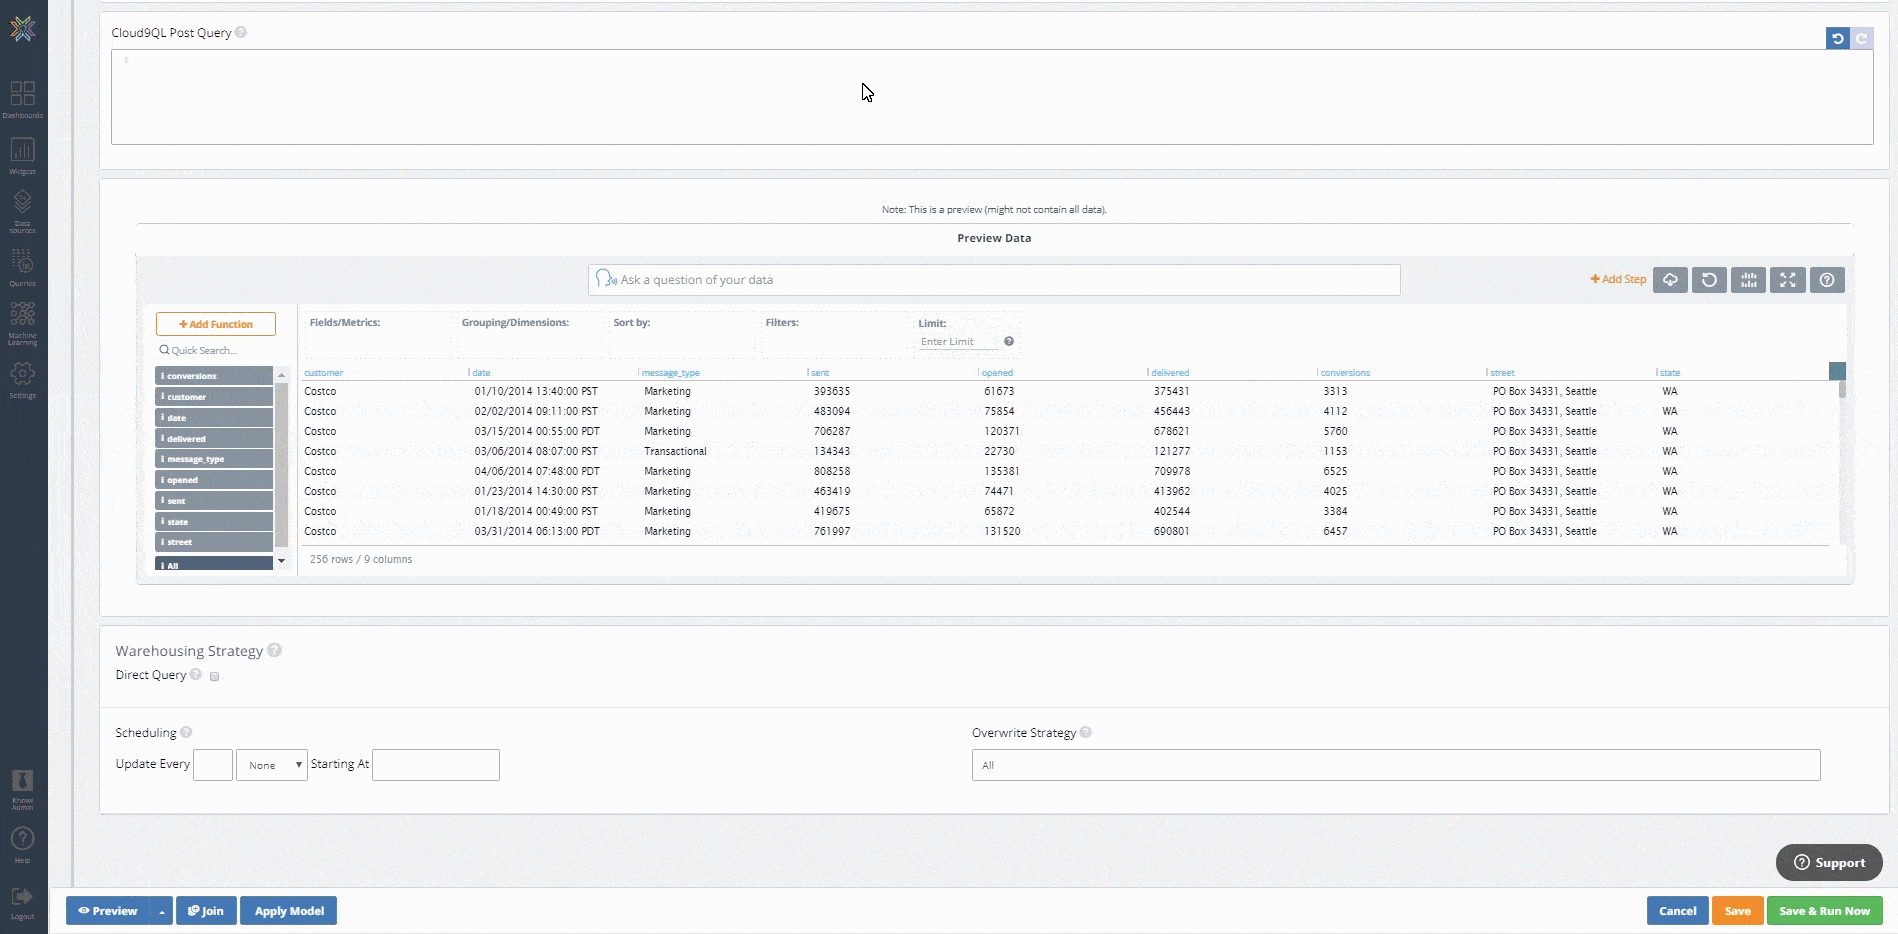 Post-processing Combined Query Results with Cloud9QL (Source - knowi.com)